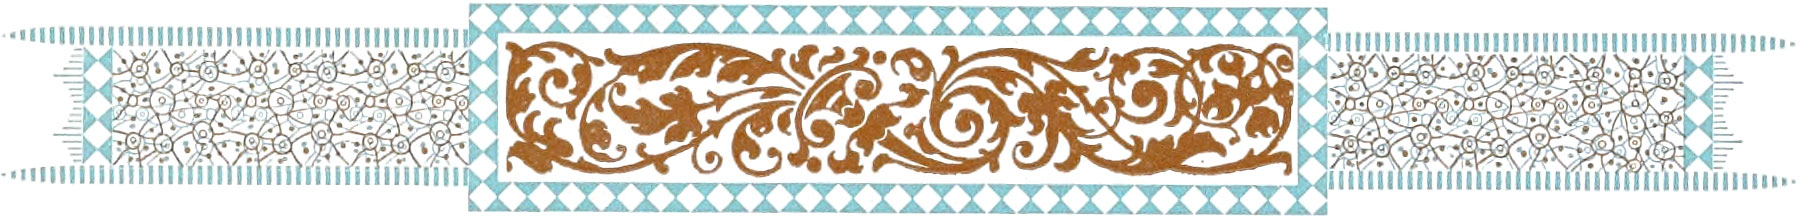 Ornate border comprising brown and teal colors